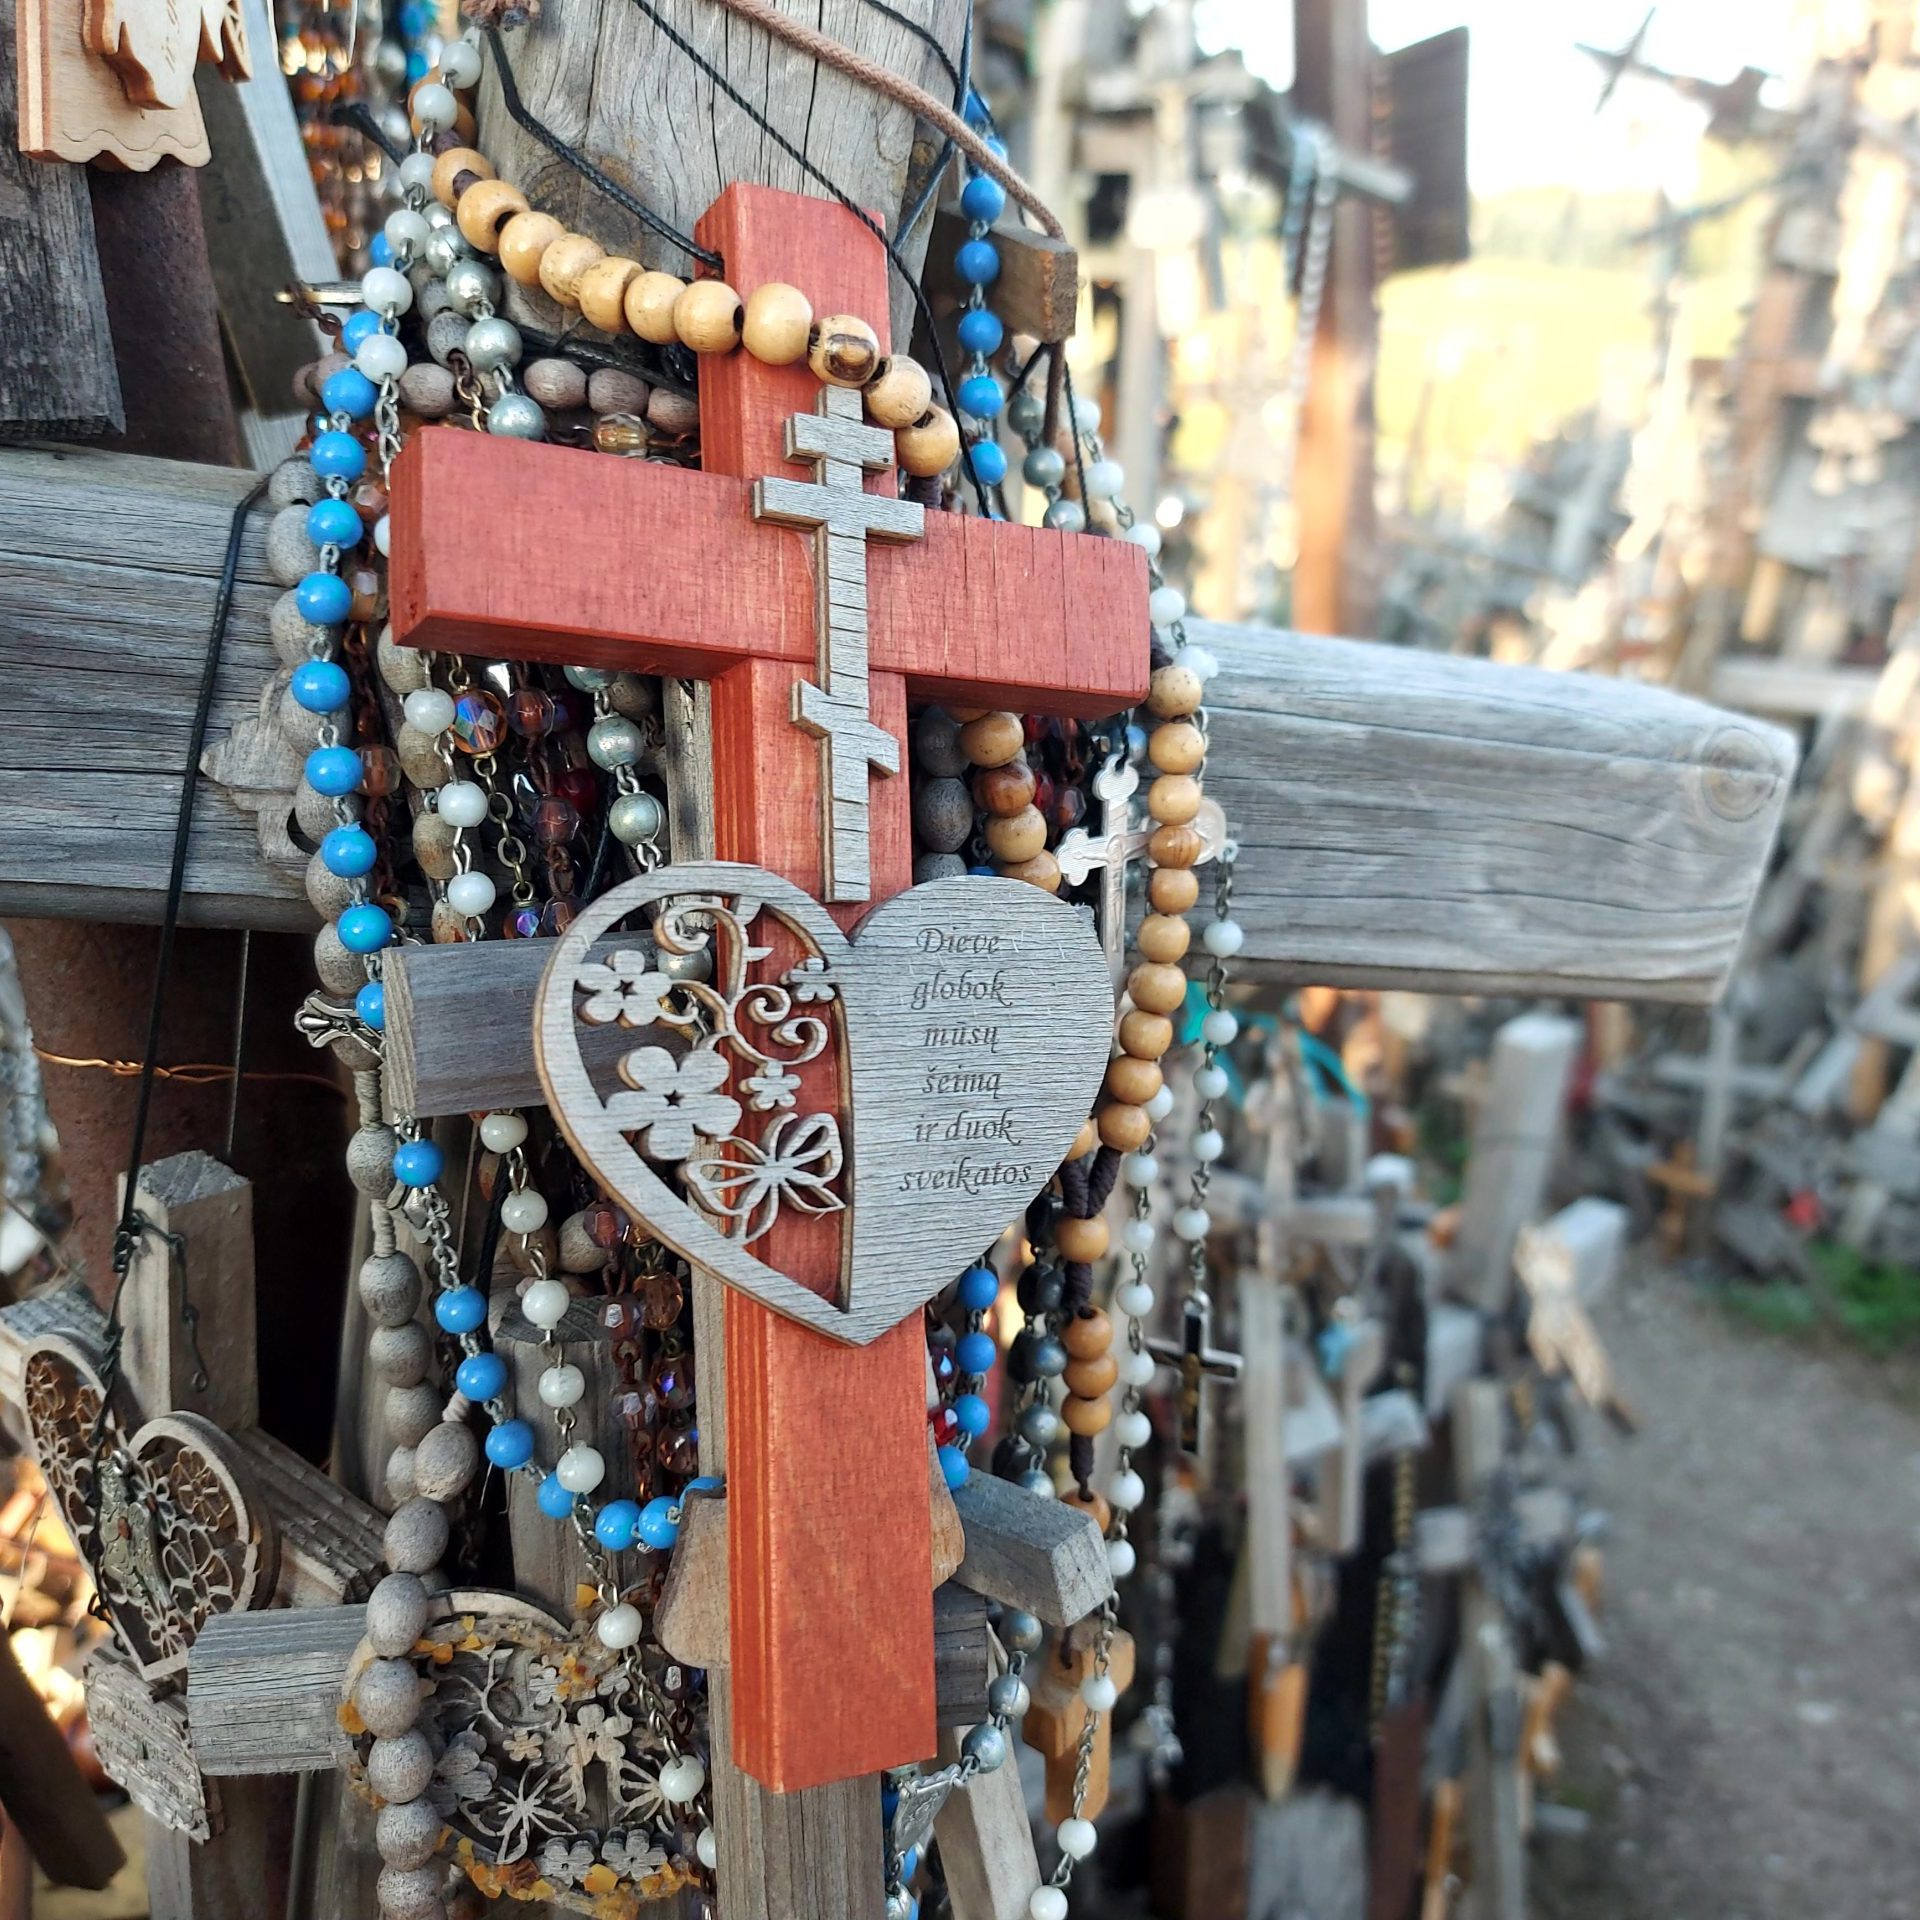 Place your own cross on the Hill of crosses